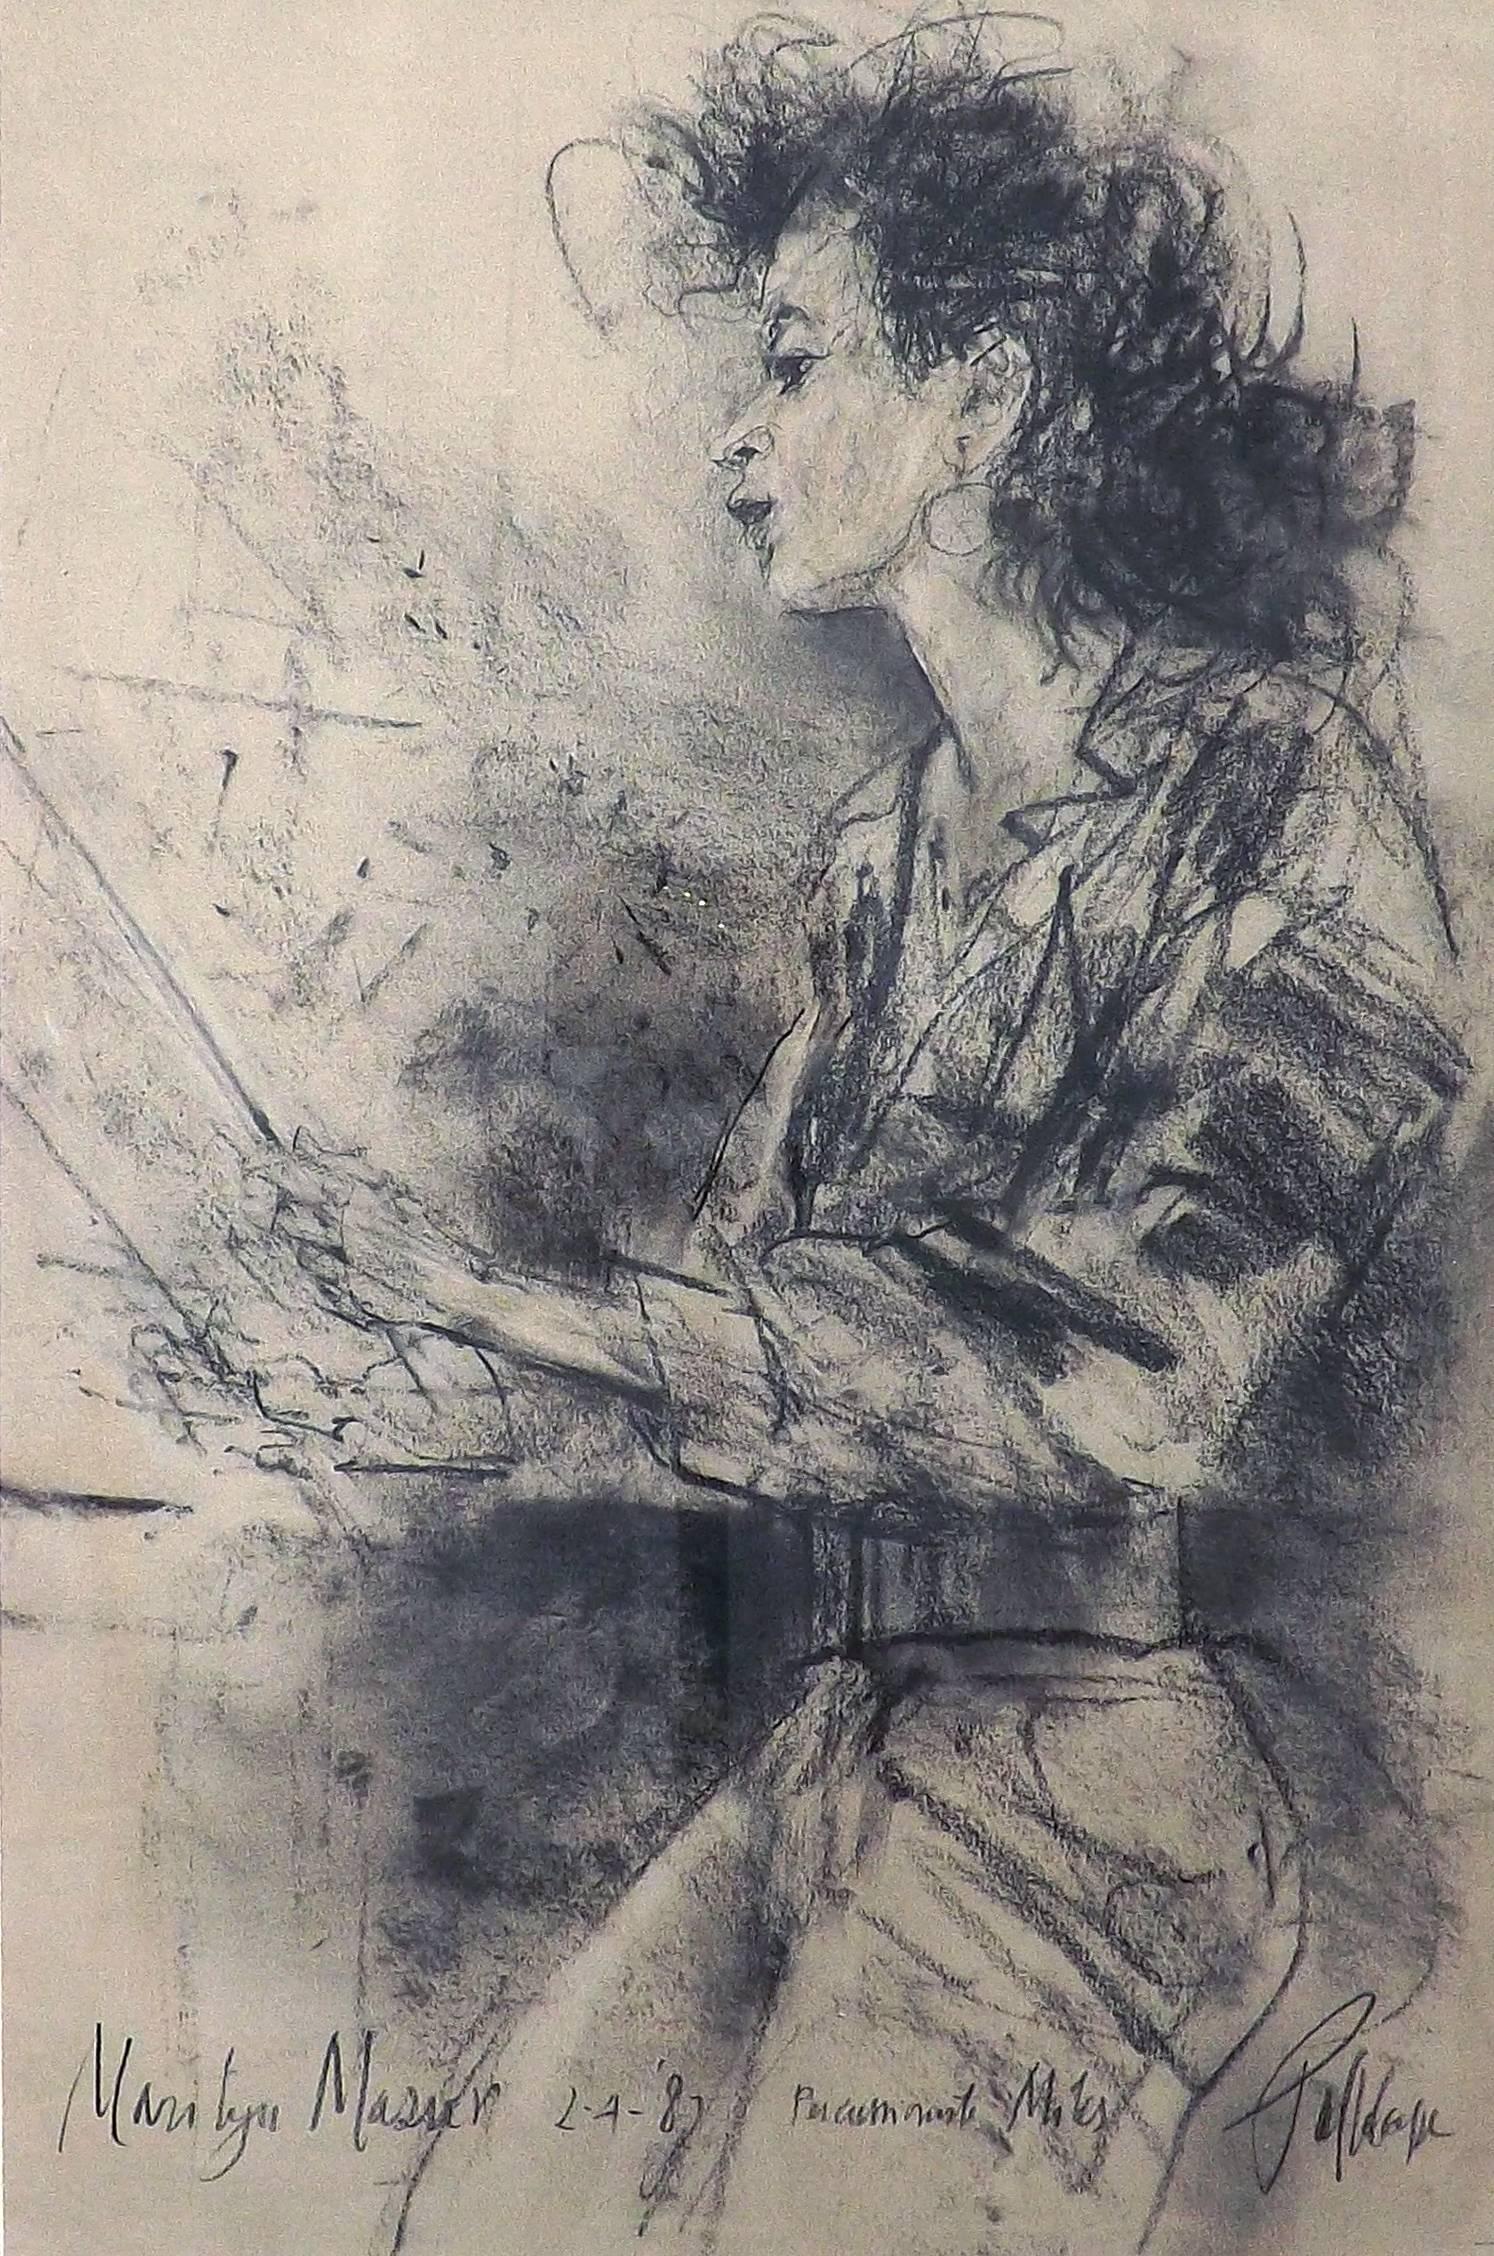 A fantastic portrait in charcoal of the jazz percussionist Marilyn Mazur by the Dutch artist Piet Klaasse, signed by both the artist and Mazur and dated 1987.

Marilyn Mazur, a famous drummer who toured with the Miles Davis Band and the Wayne